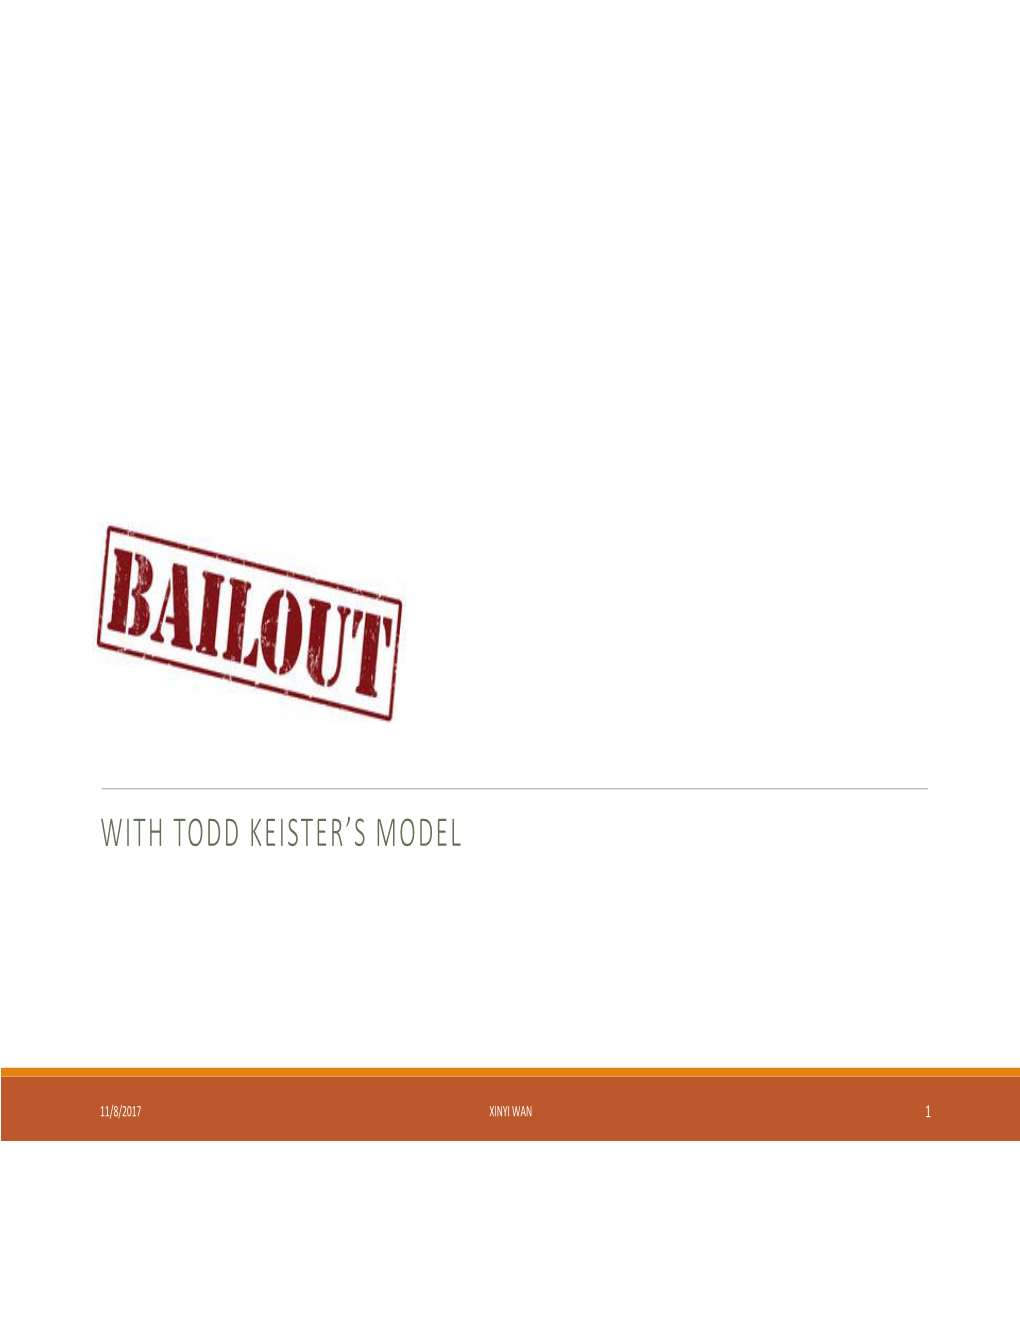 Bailouts with TODD KEISTER’S MODEL